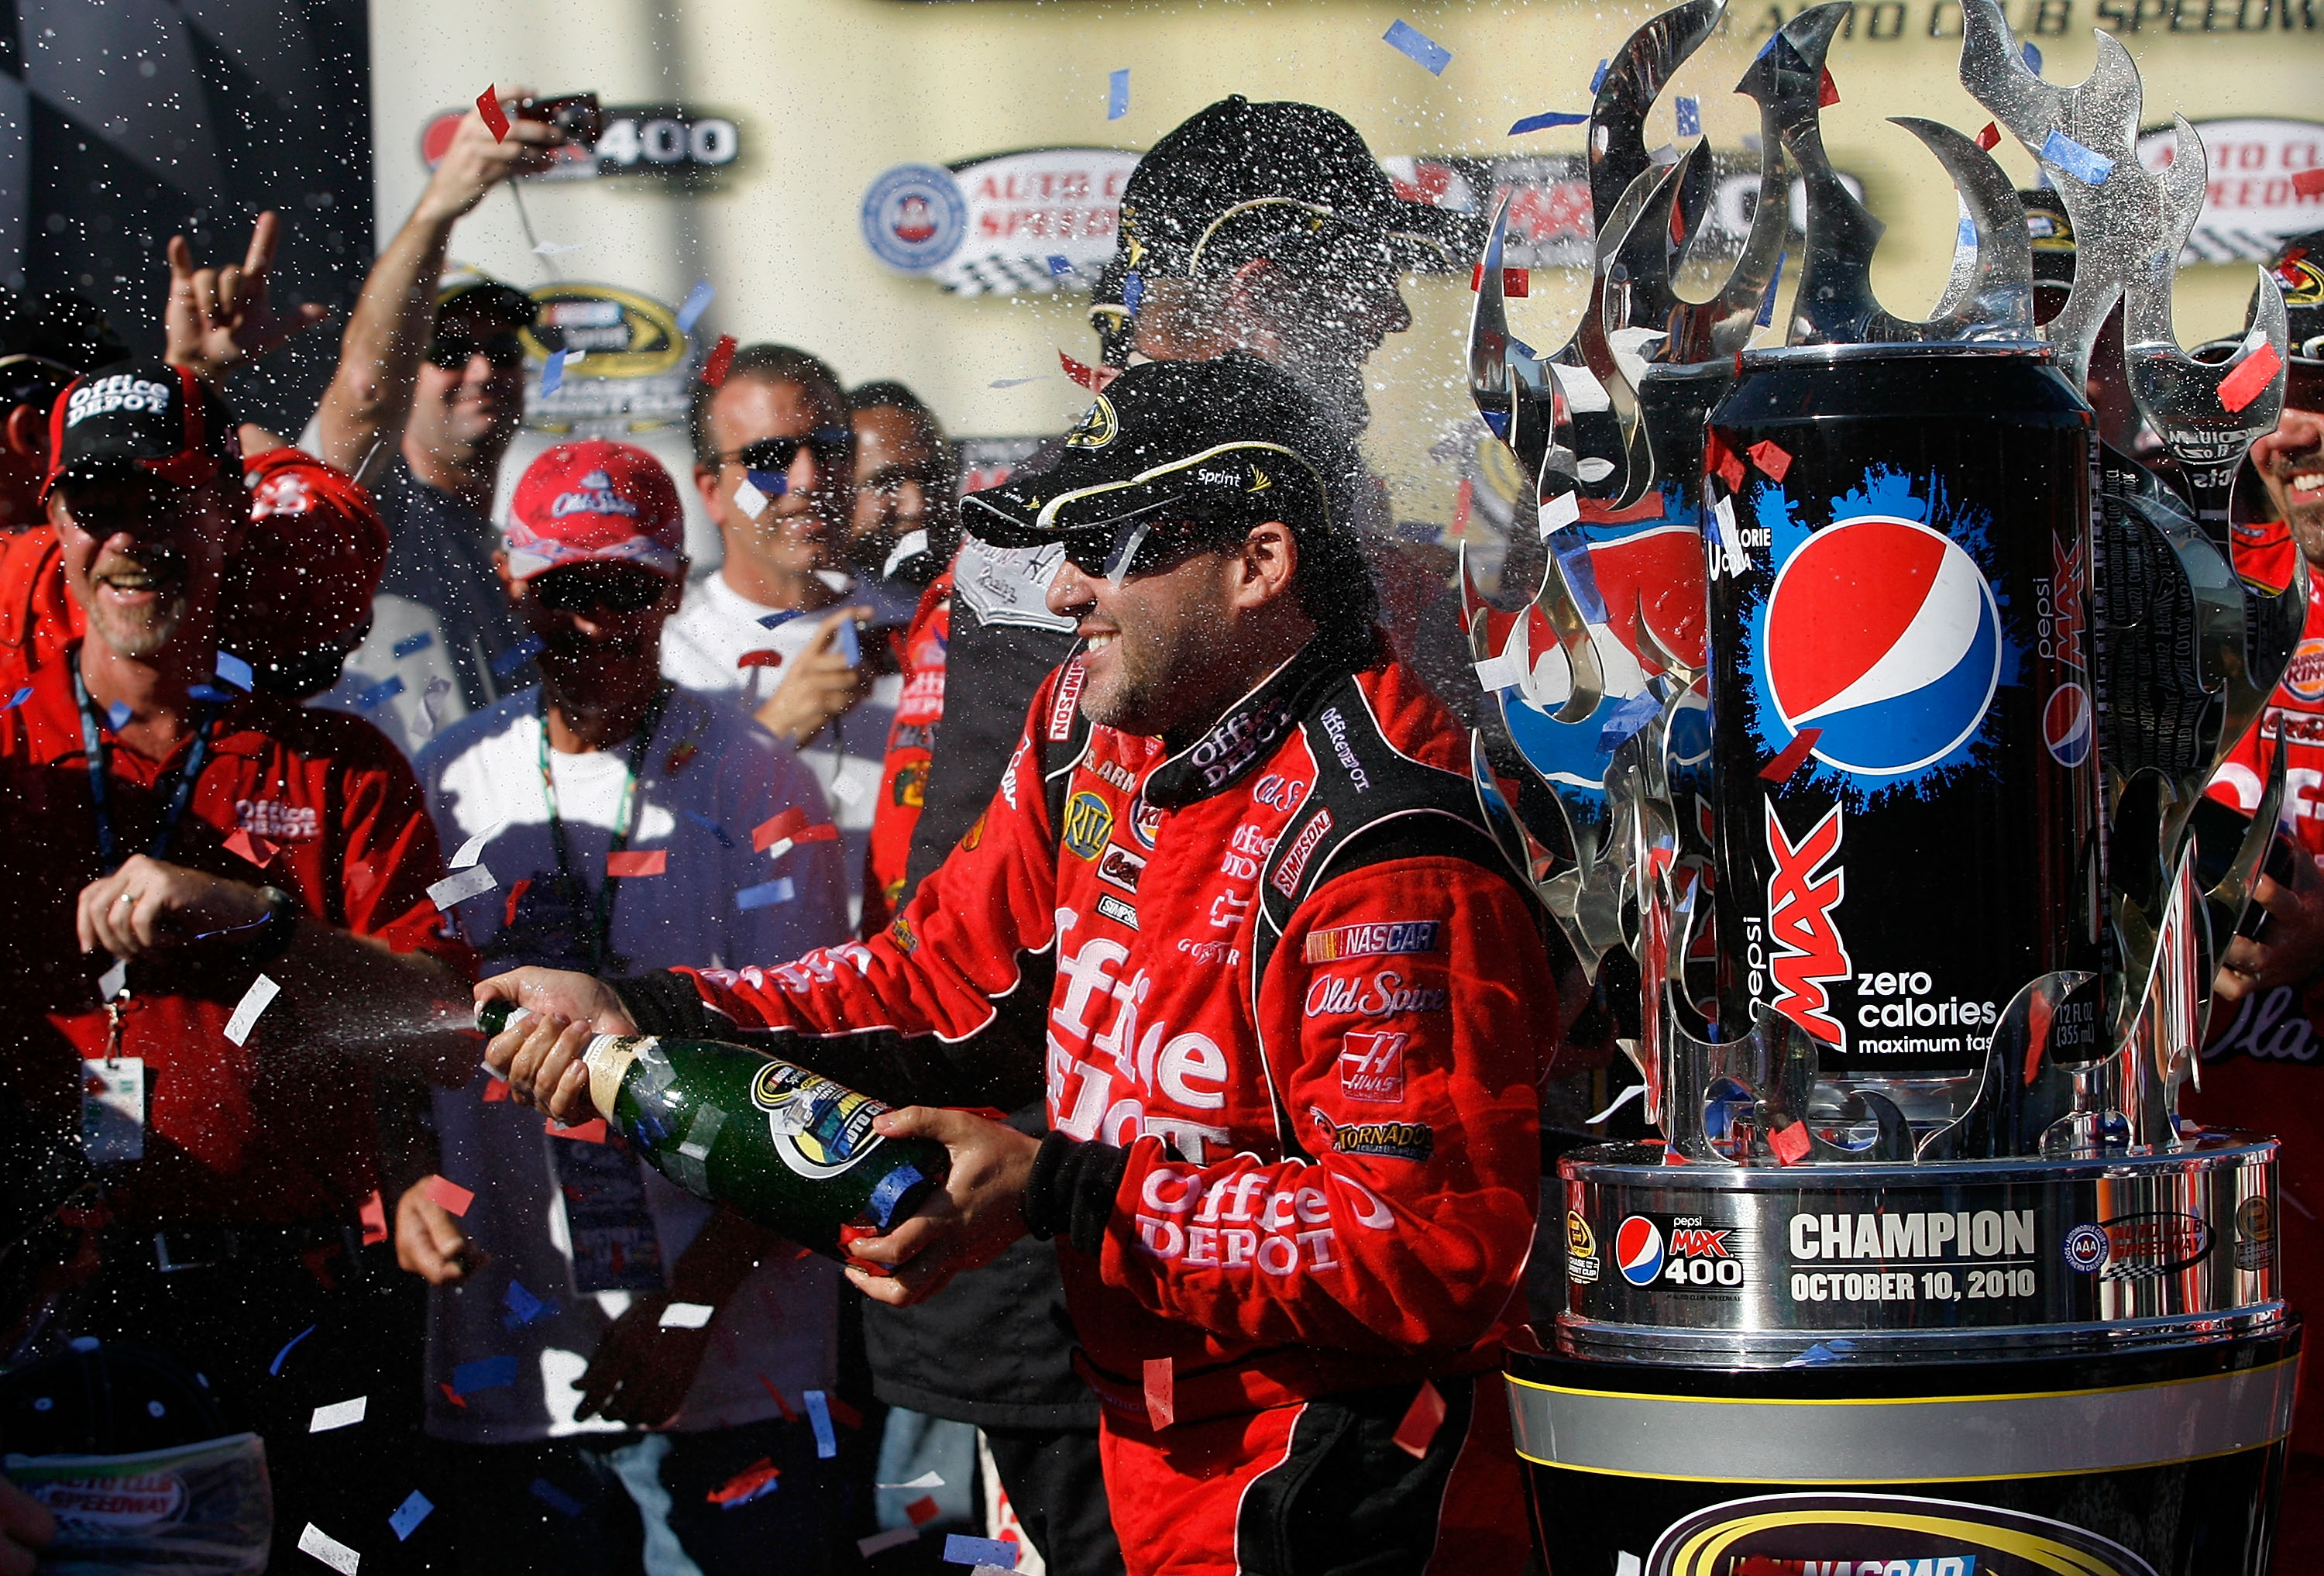 FONTANA, CA - OCTOBER 10:  Tony Stewart (R), driver of the #14 Office Depot Chevrolet, celebrates in victory lane after winning the NASCAR Sprint Cup Series Pepsi Max 400 on October 10, 2010 in Fontana, California.  (Photo by Tom Pennington/Getty Images f